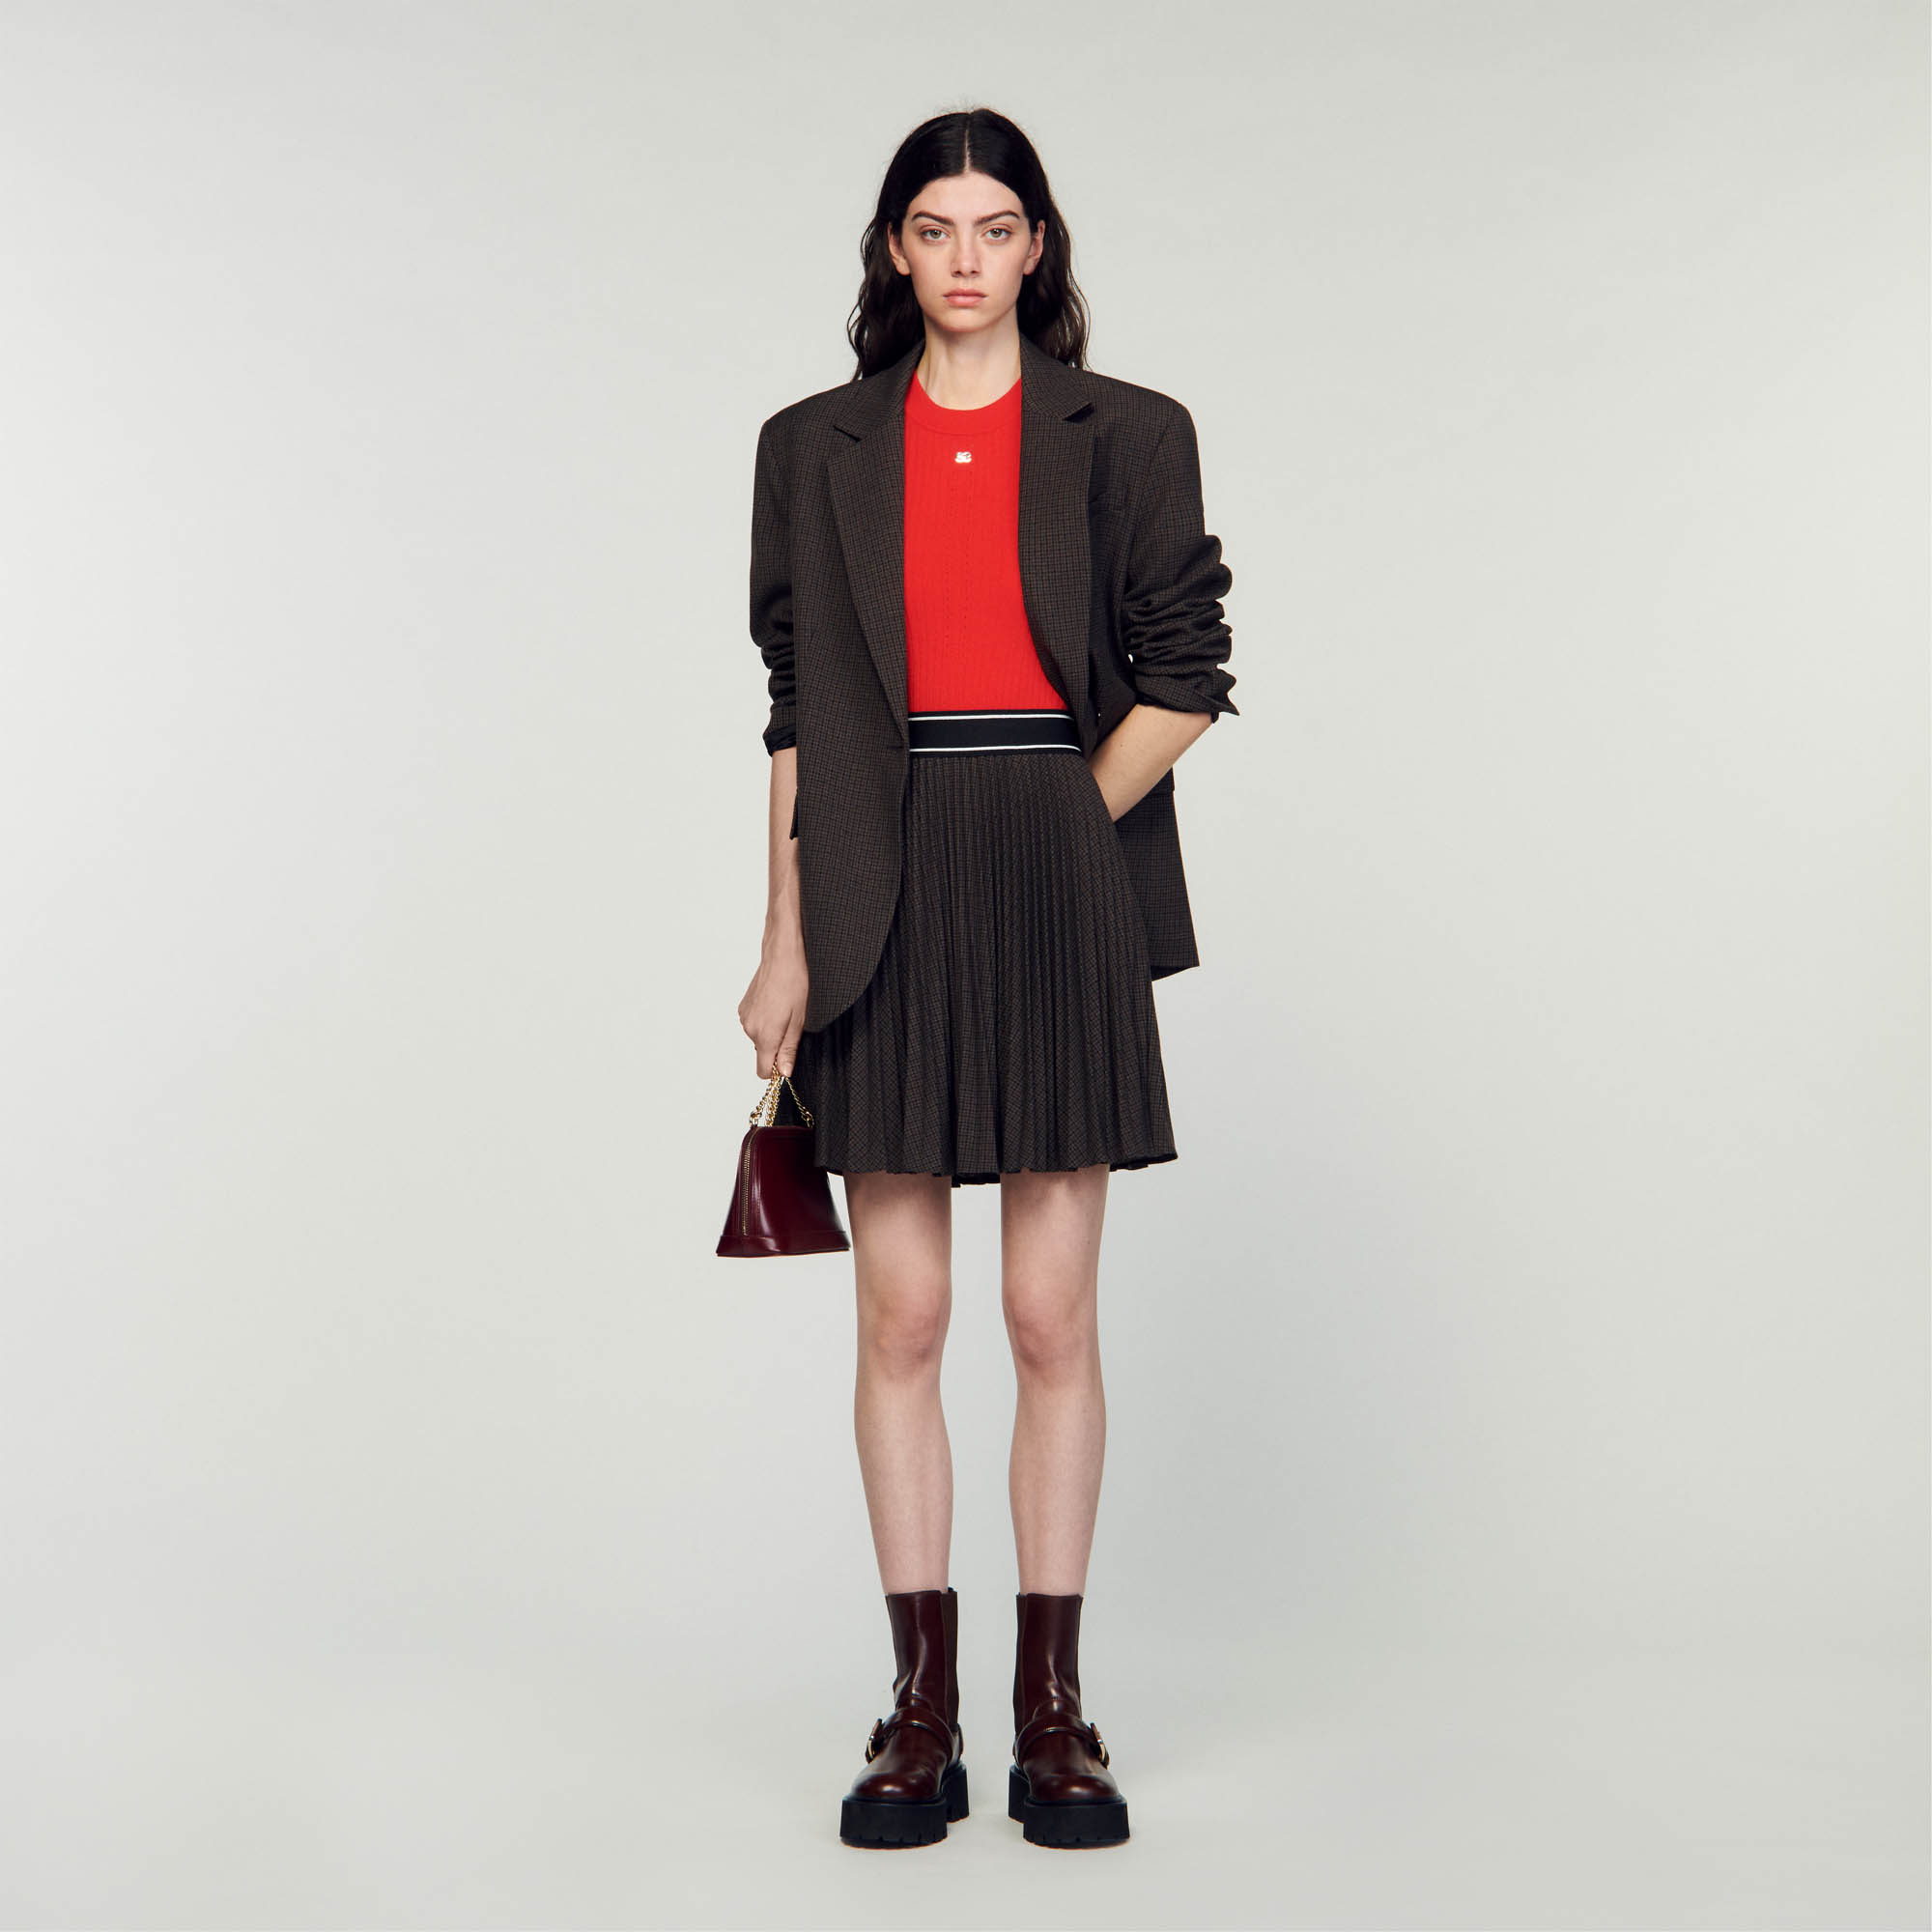 Sandro polyester Short pleated skirt in a check pattern, with an elasticated waistband with contrasting trim